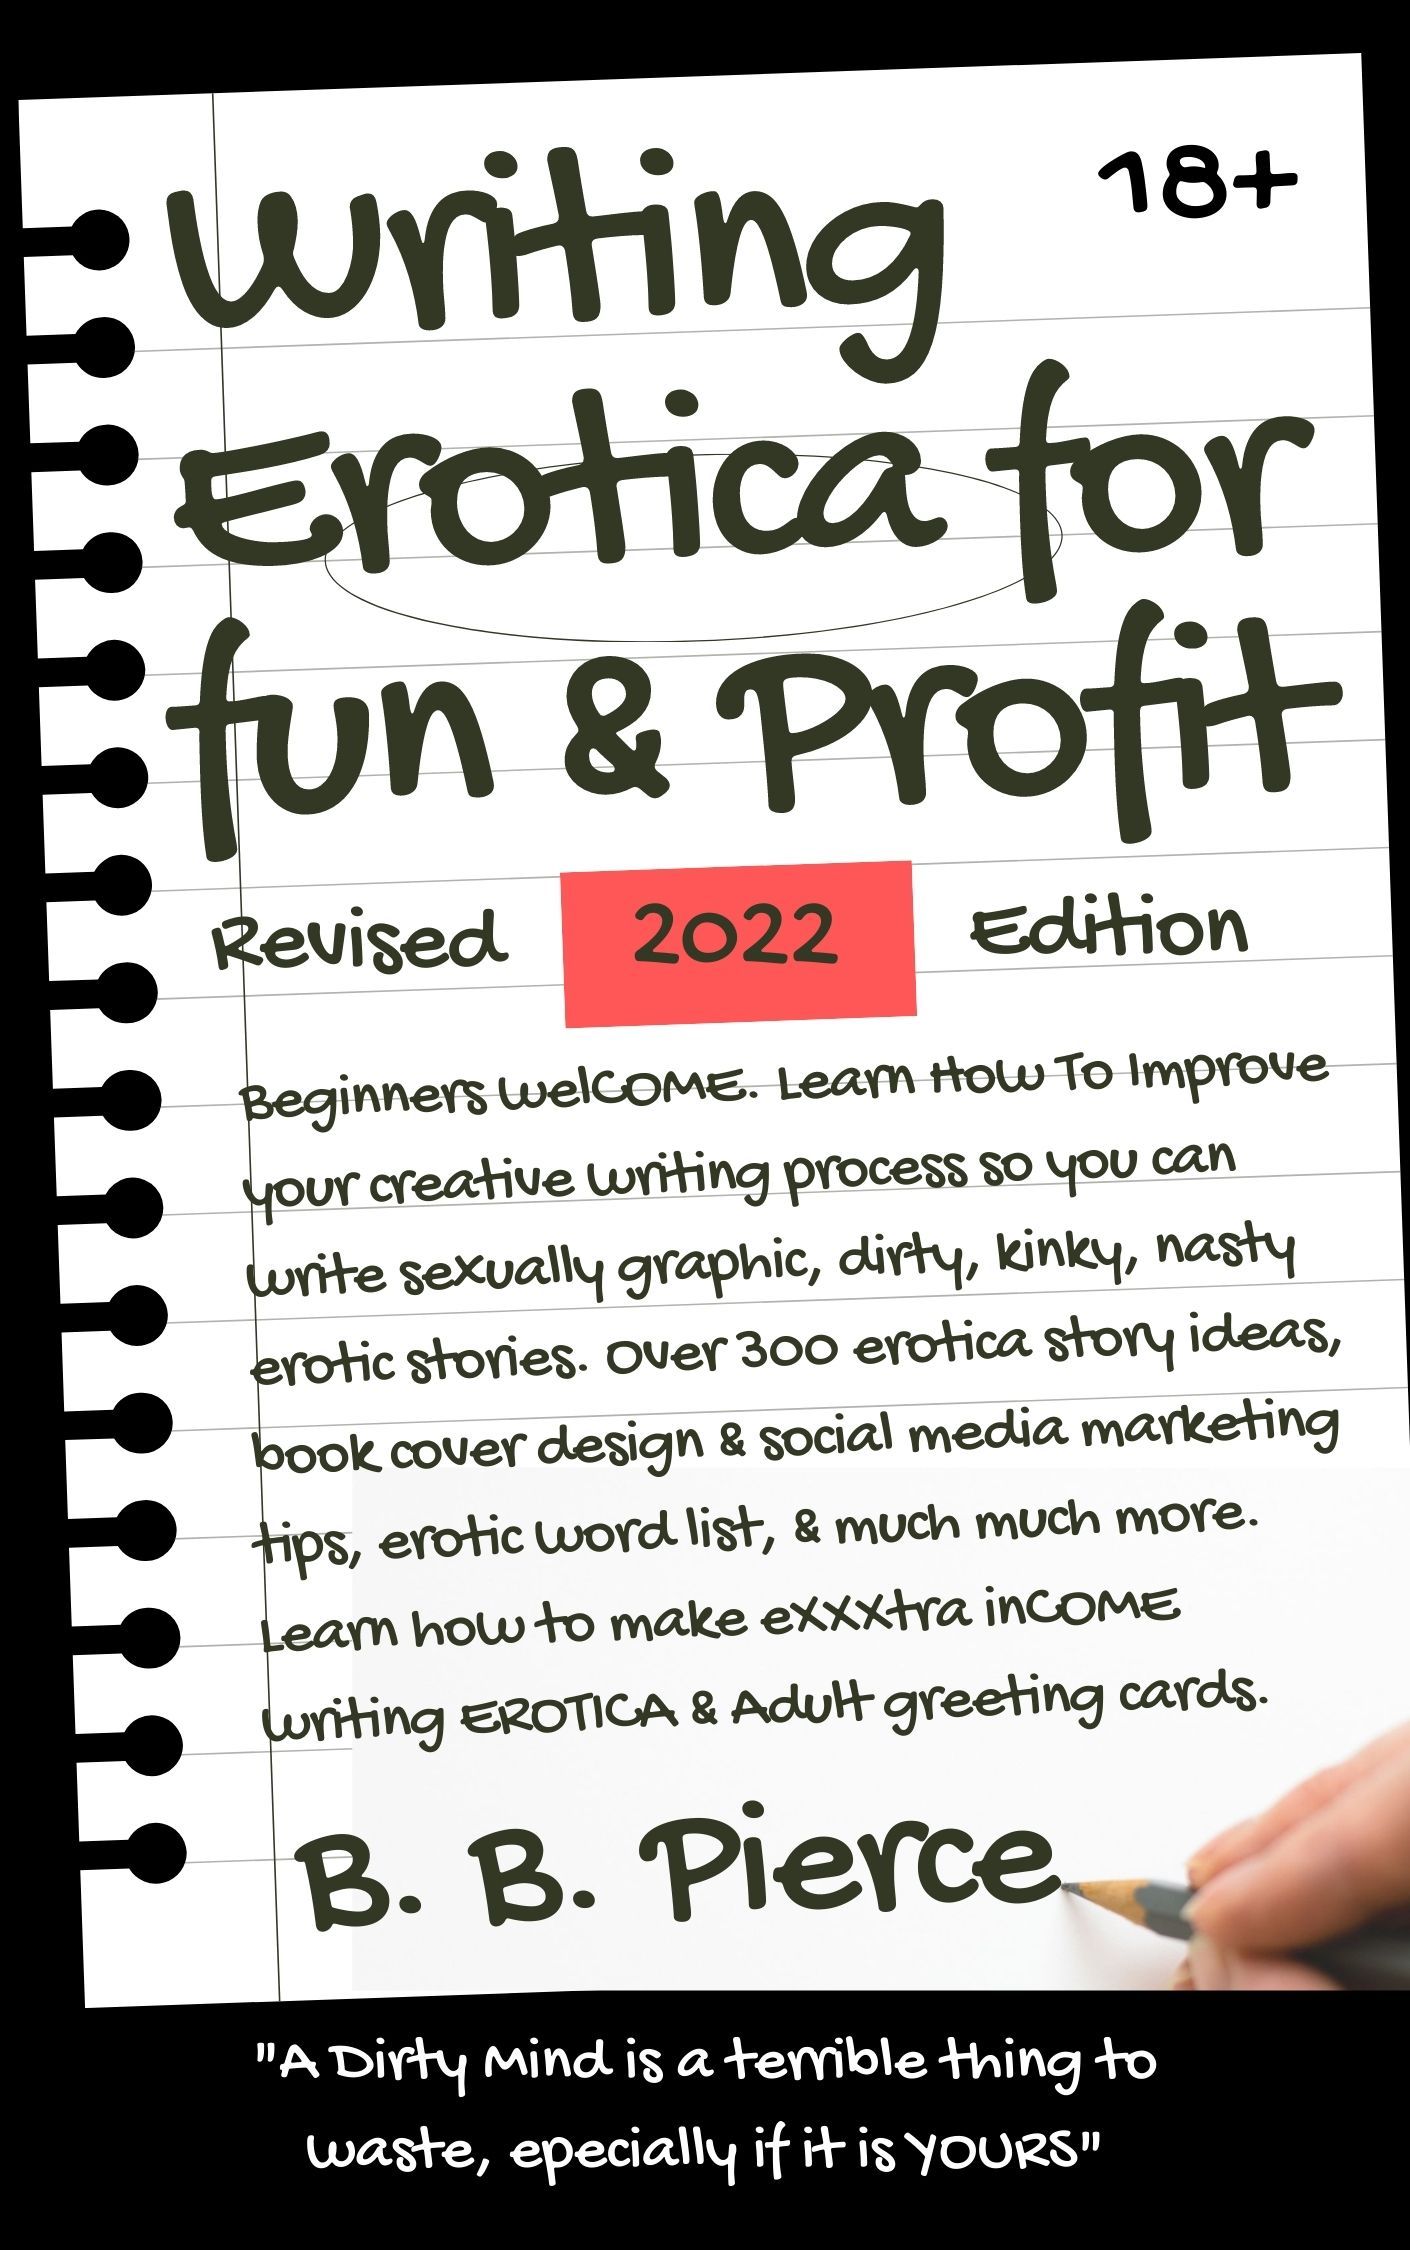 Writing Erotica For Fun & Profit Revised Edition's Book Image